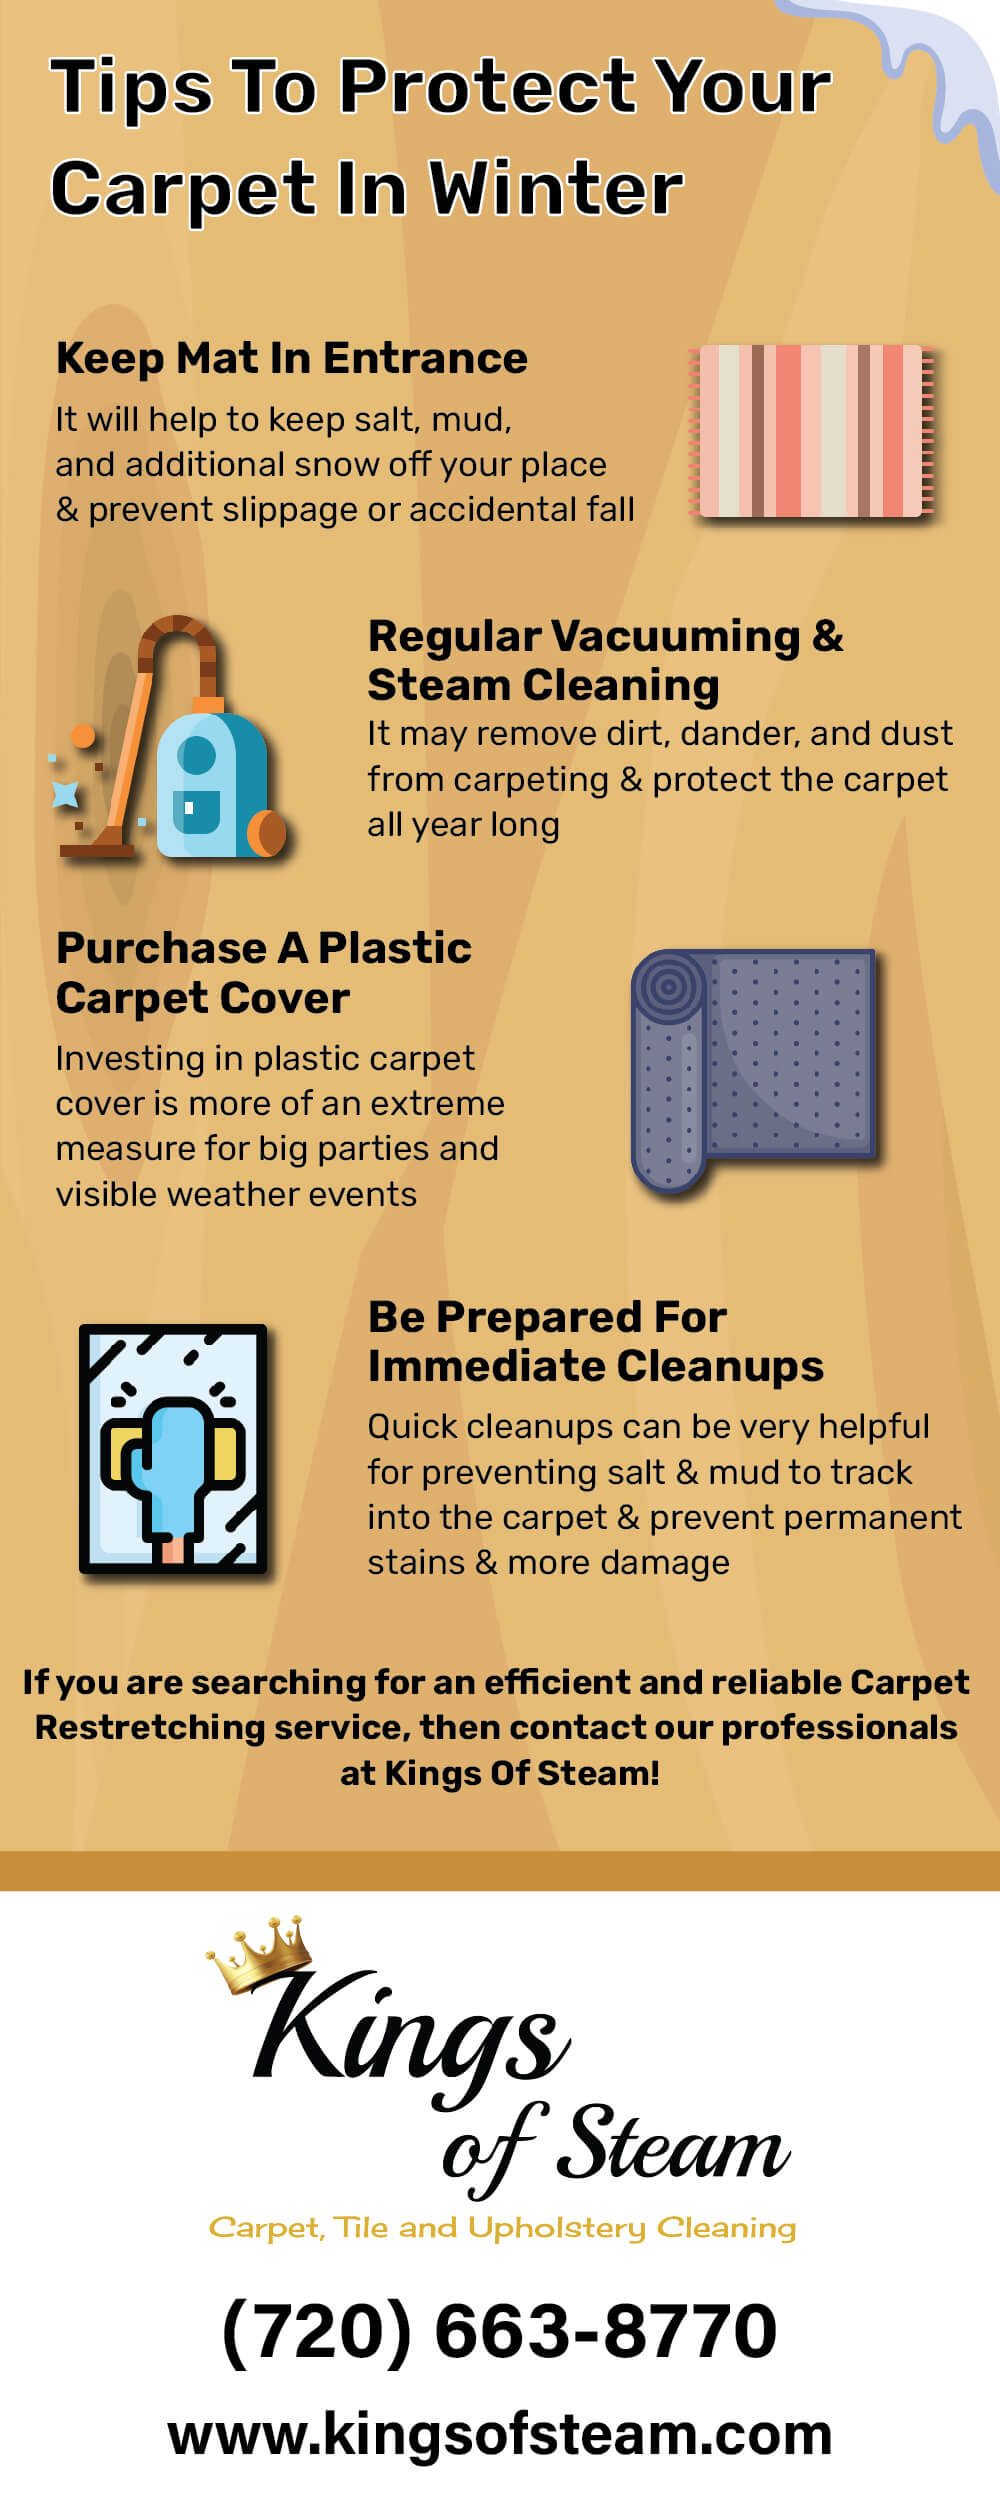 Carpet Restretching And Protecting it in Winter